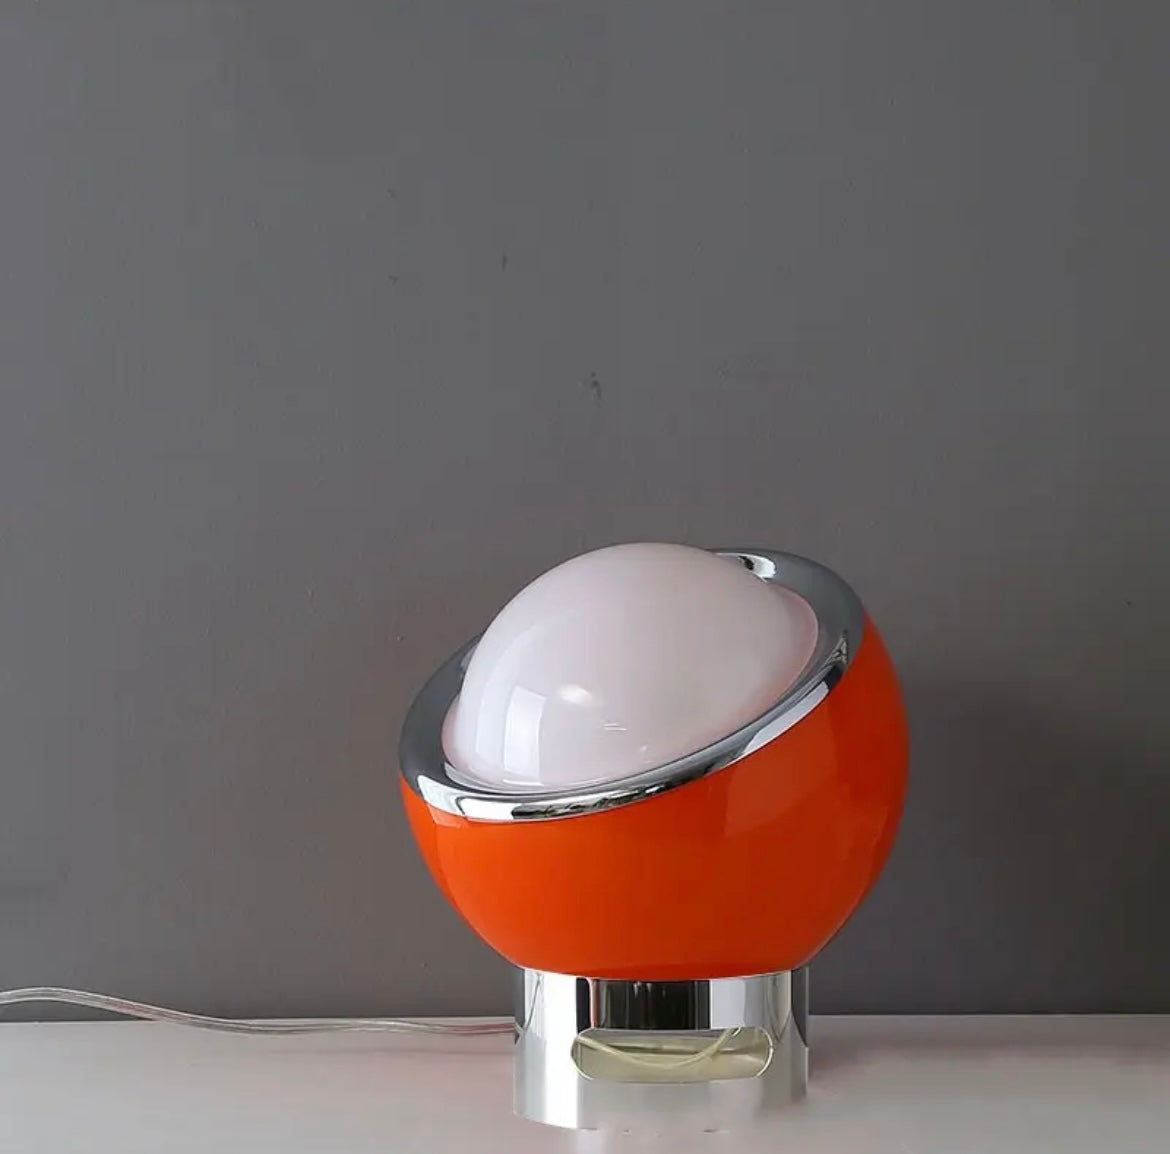 The Nordic Orb Lamp